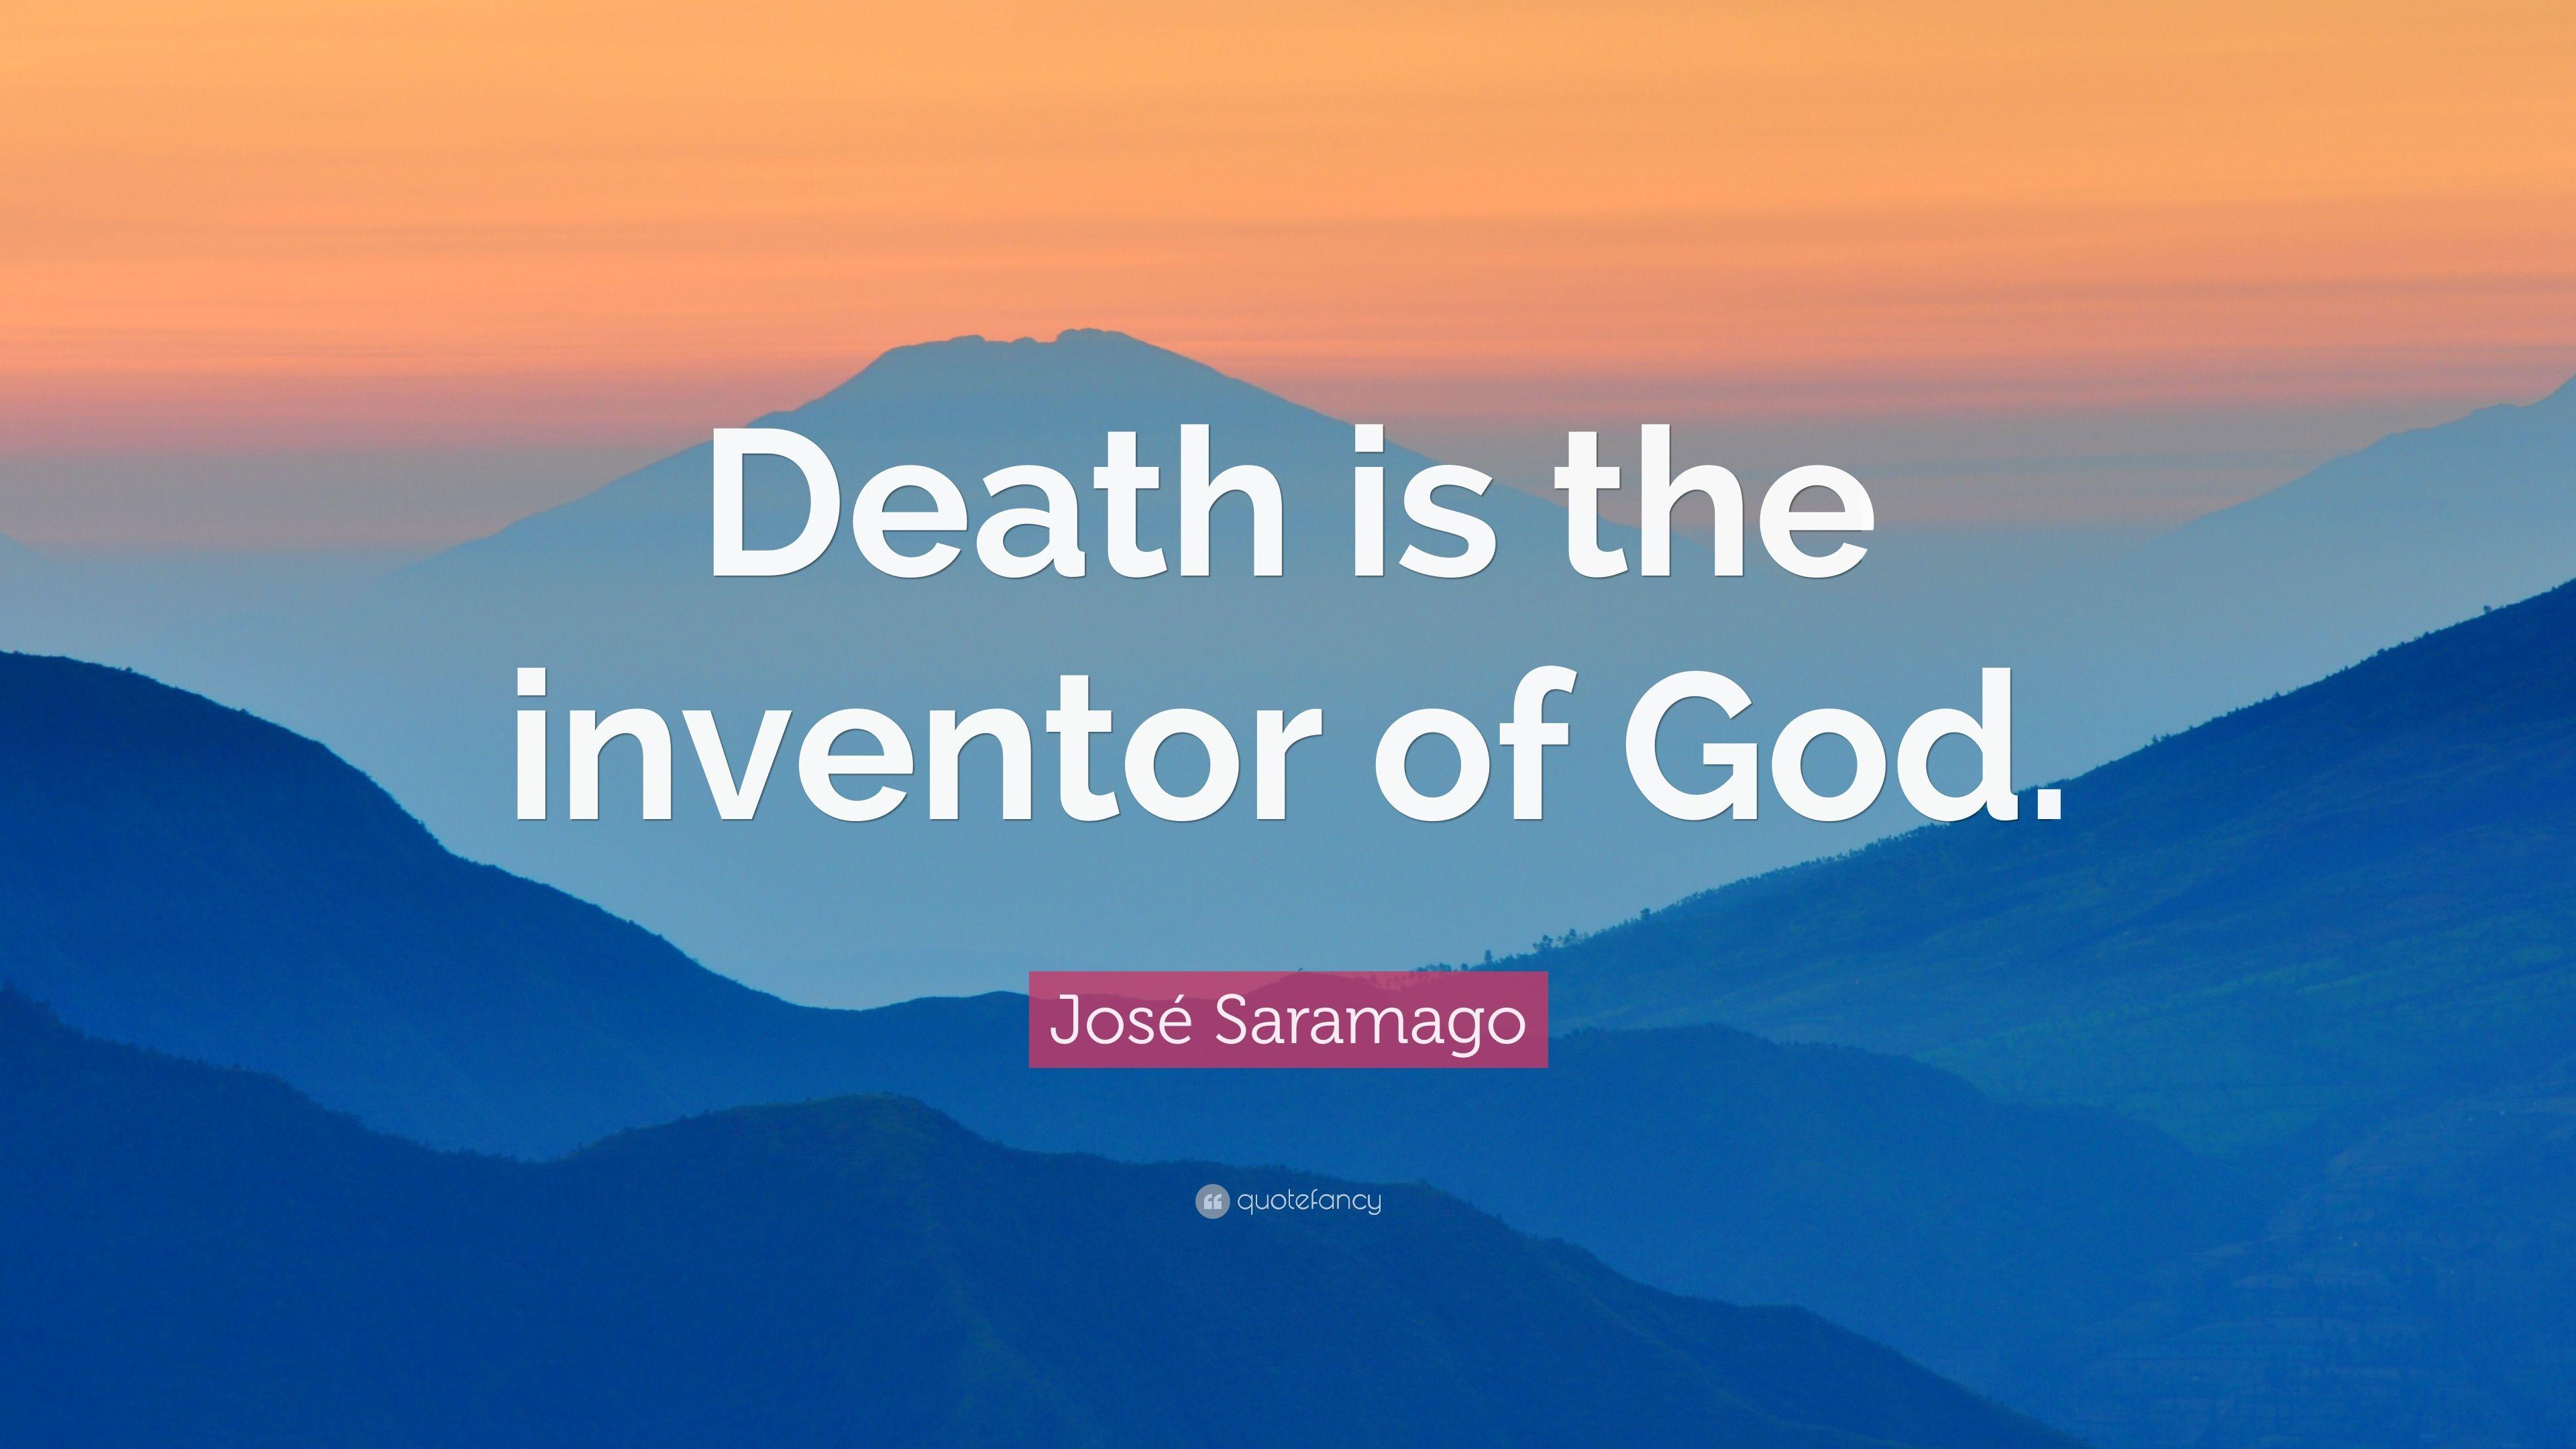 José Saramago Quote: “Death is the inventor of God.” 7 wallpaper